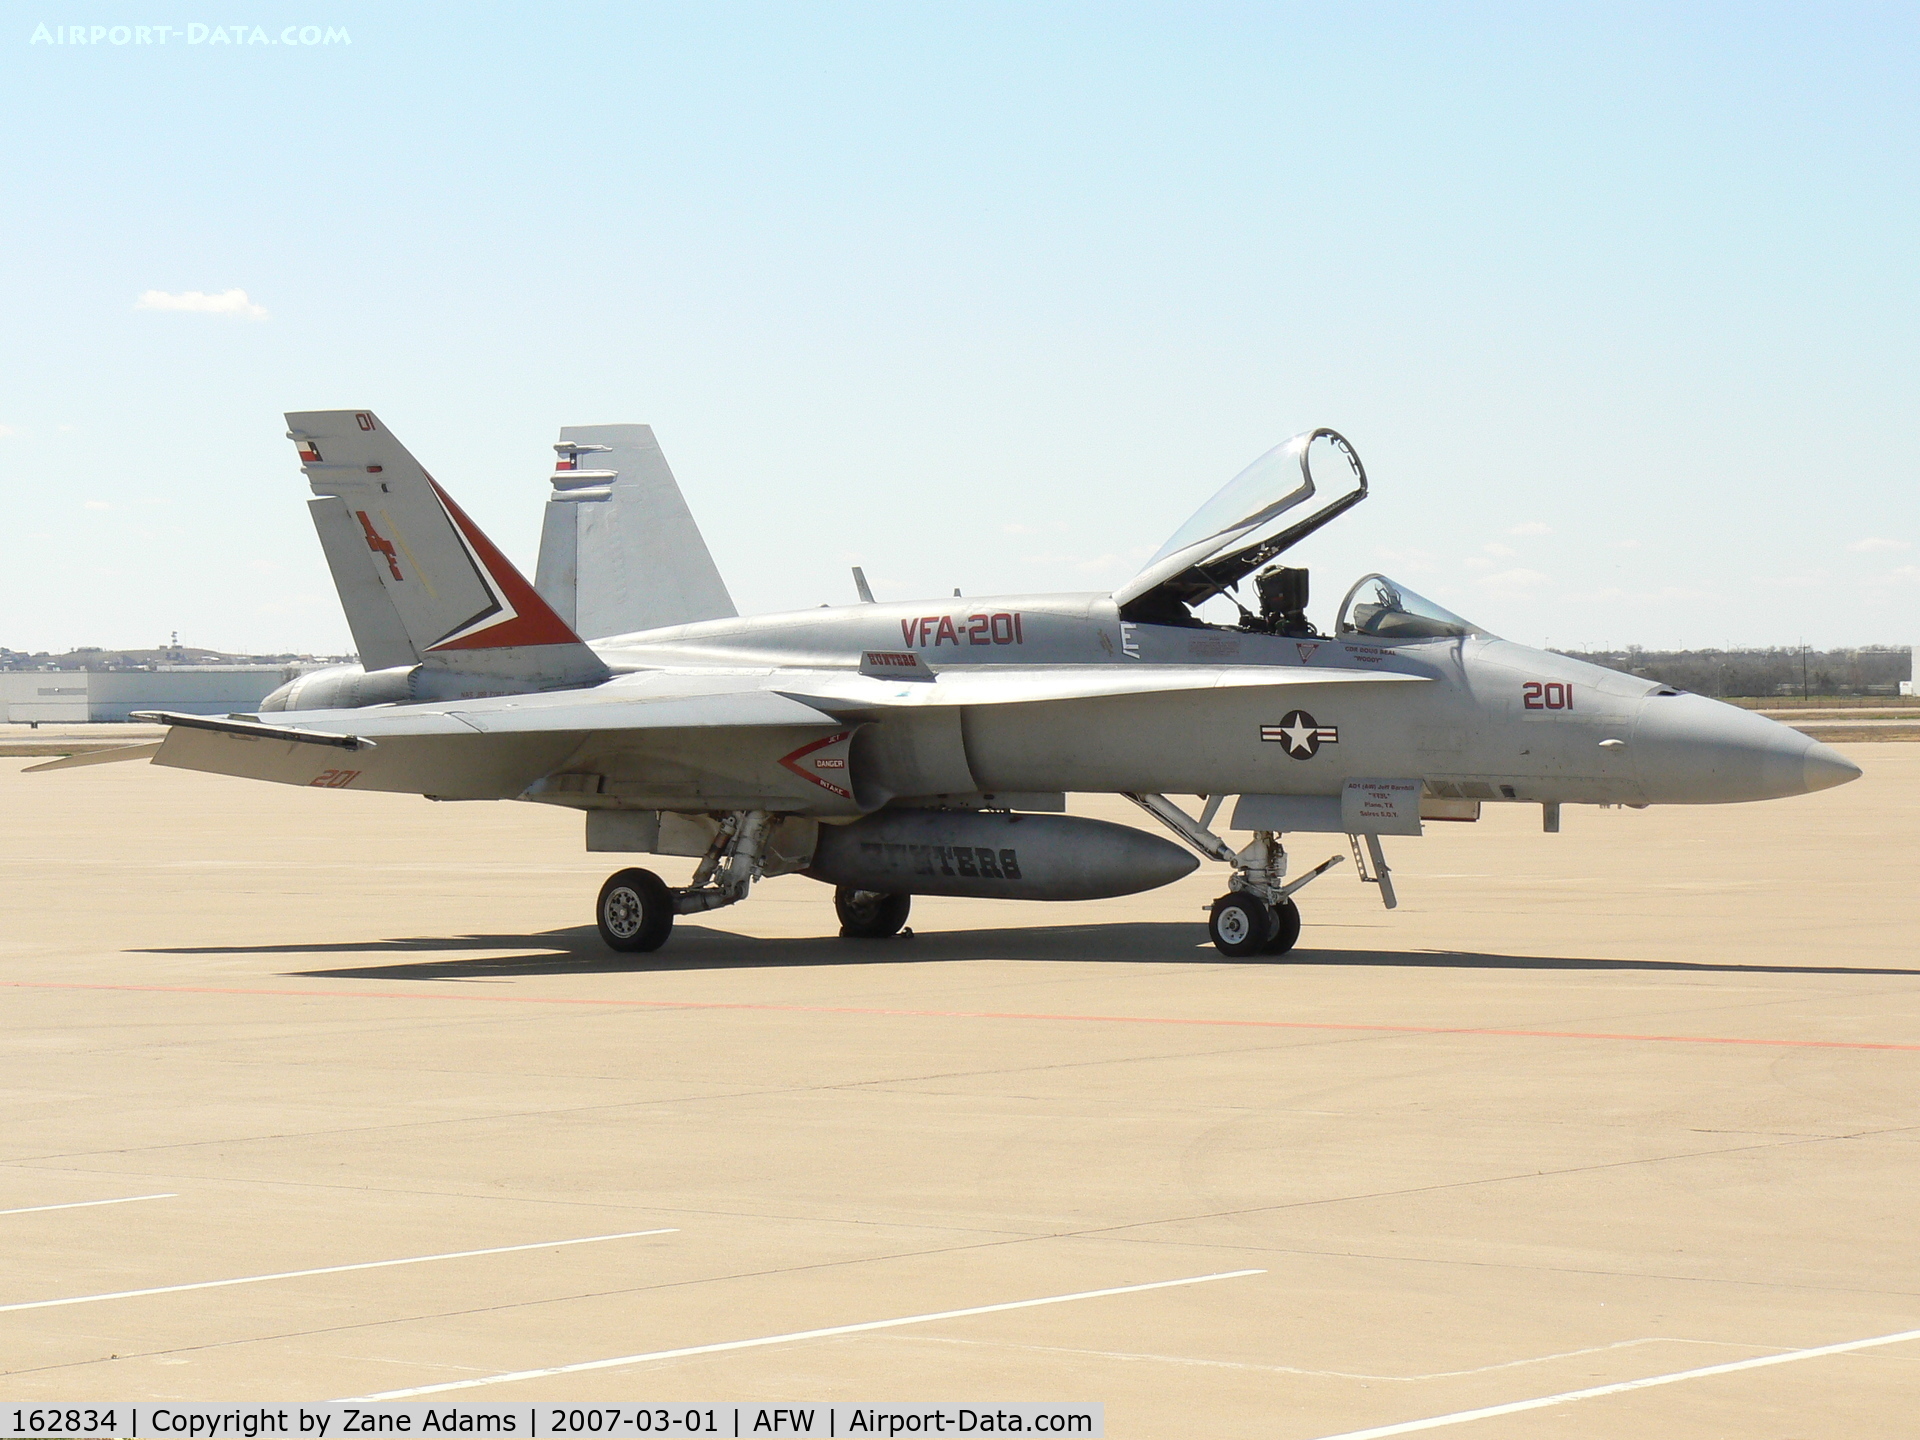 162834, McDonnell Douglas F/A-18A Hornet C/N 0351, On the ramp at Allaince Ft. Worth